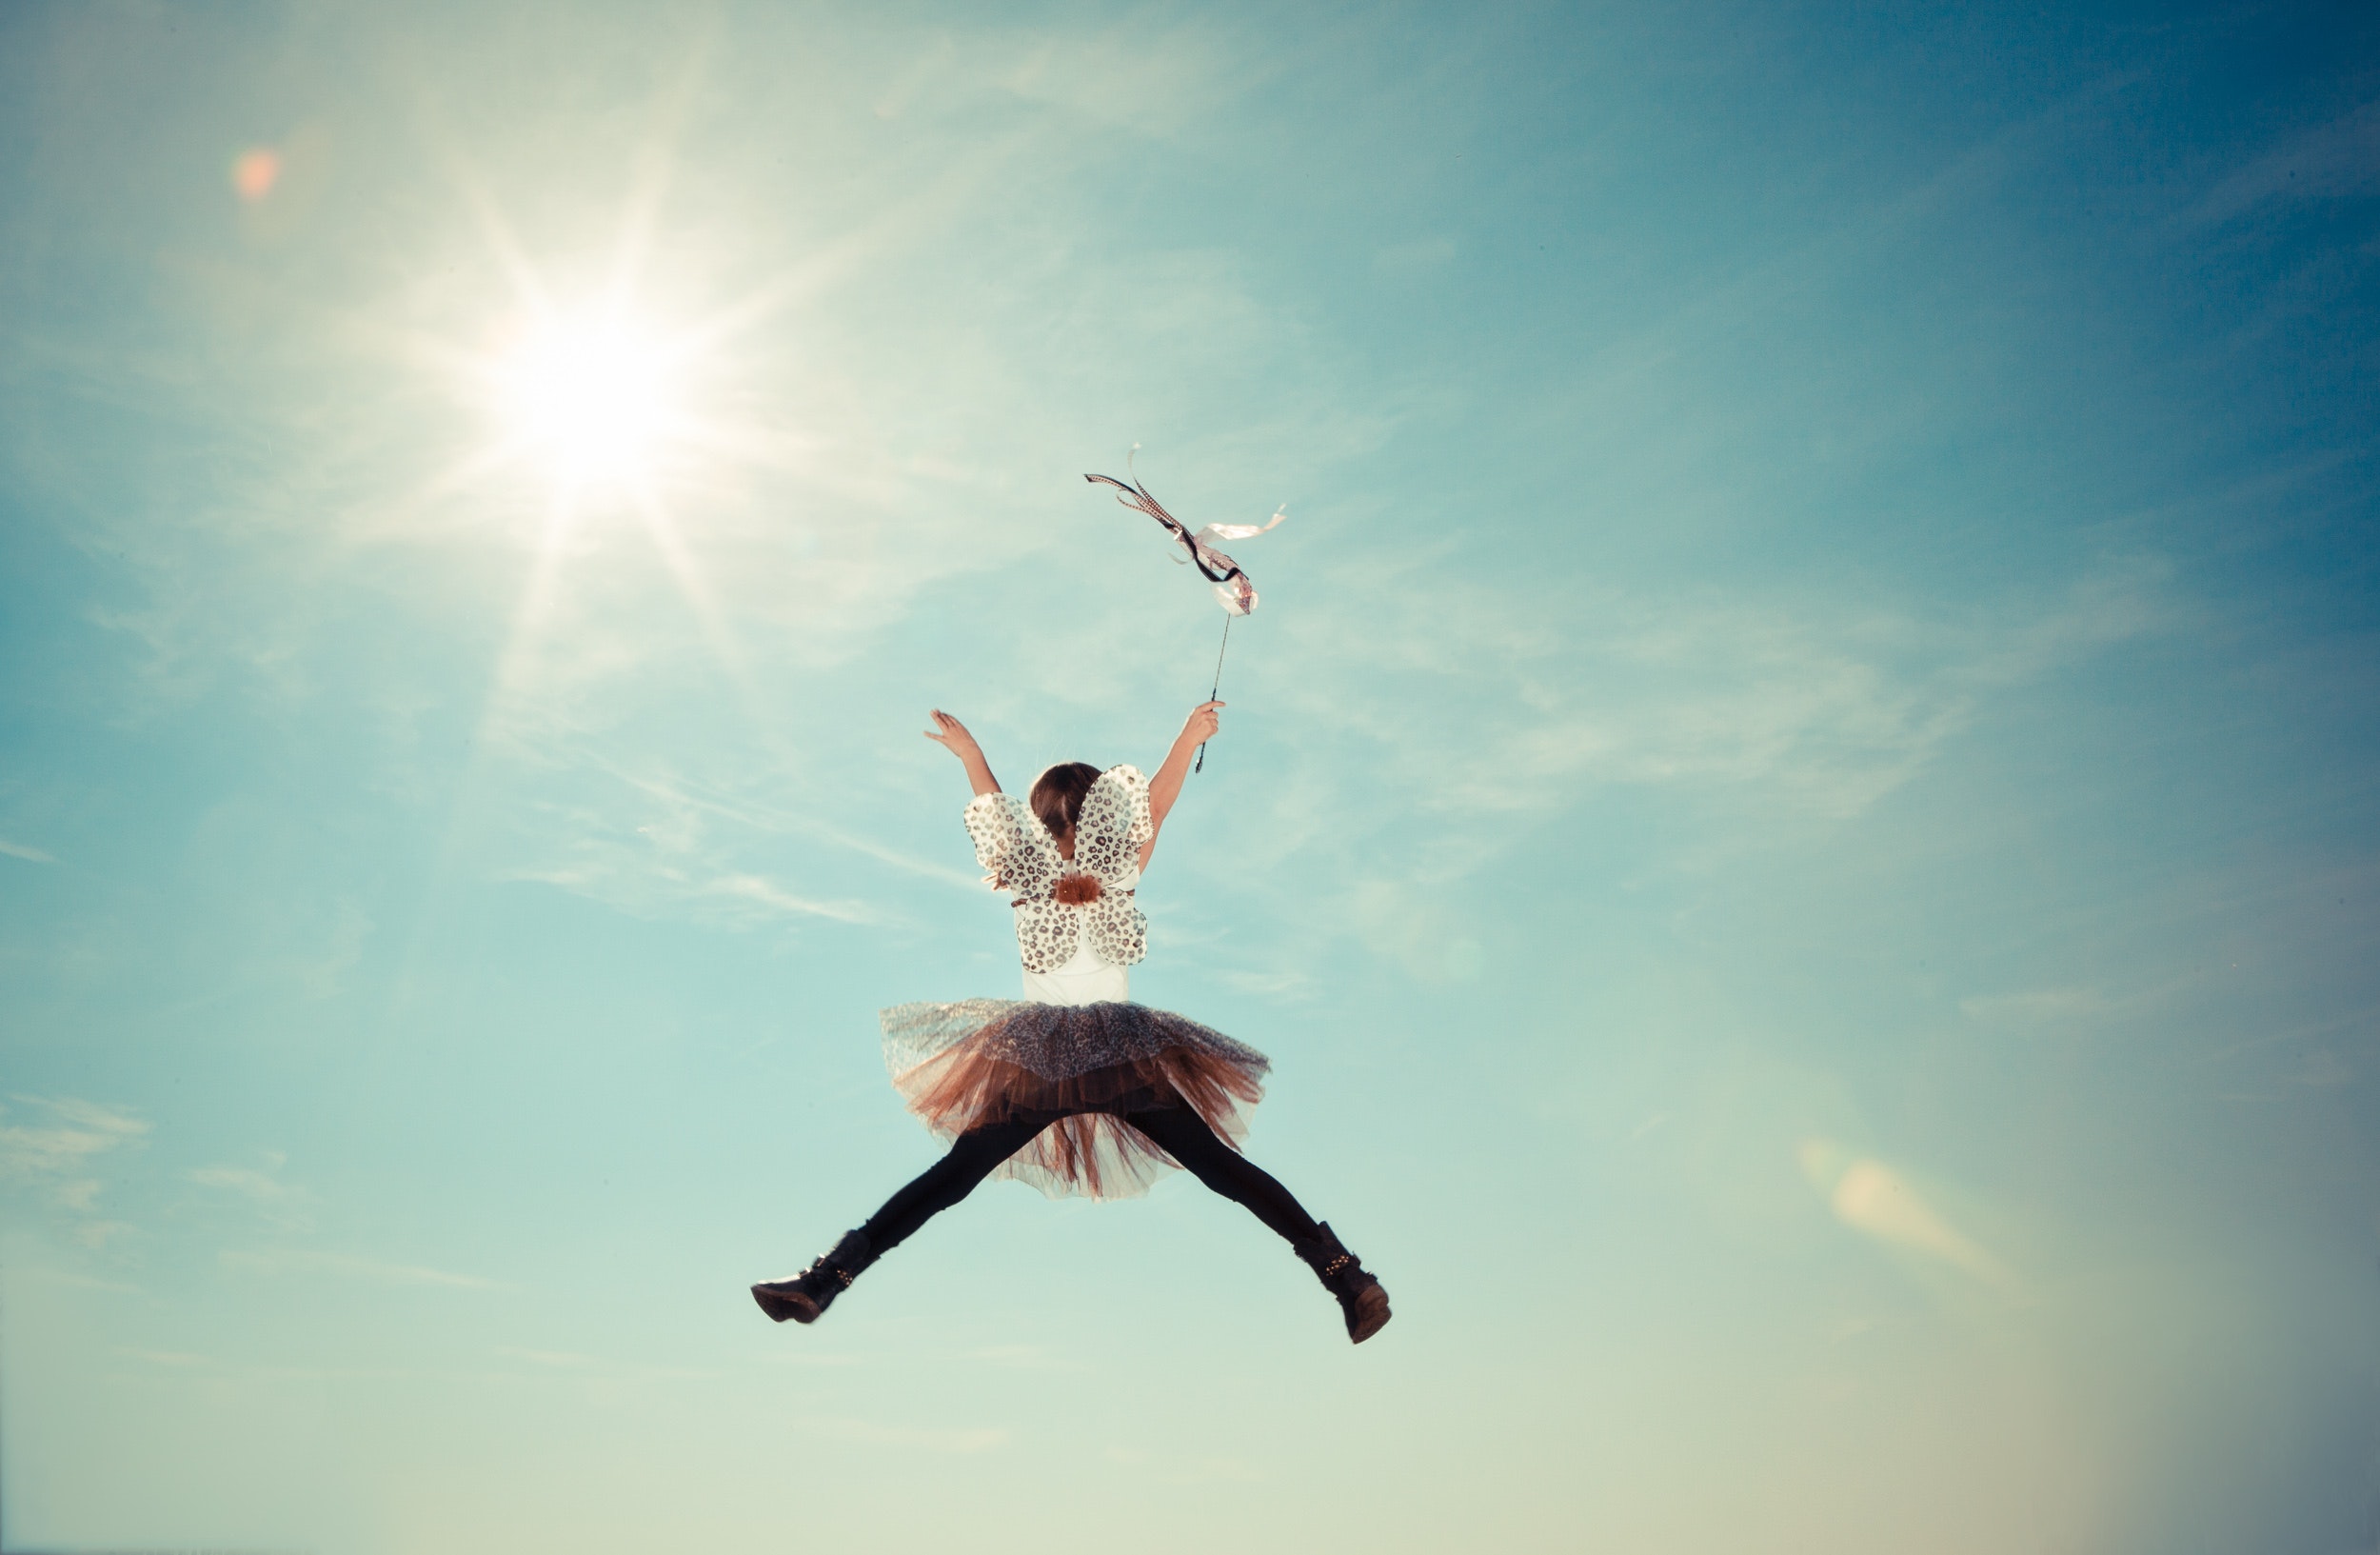 Child with fairy wings and skirt jumps into the air